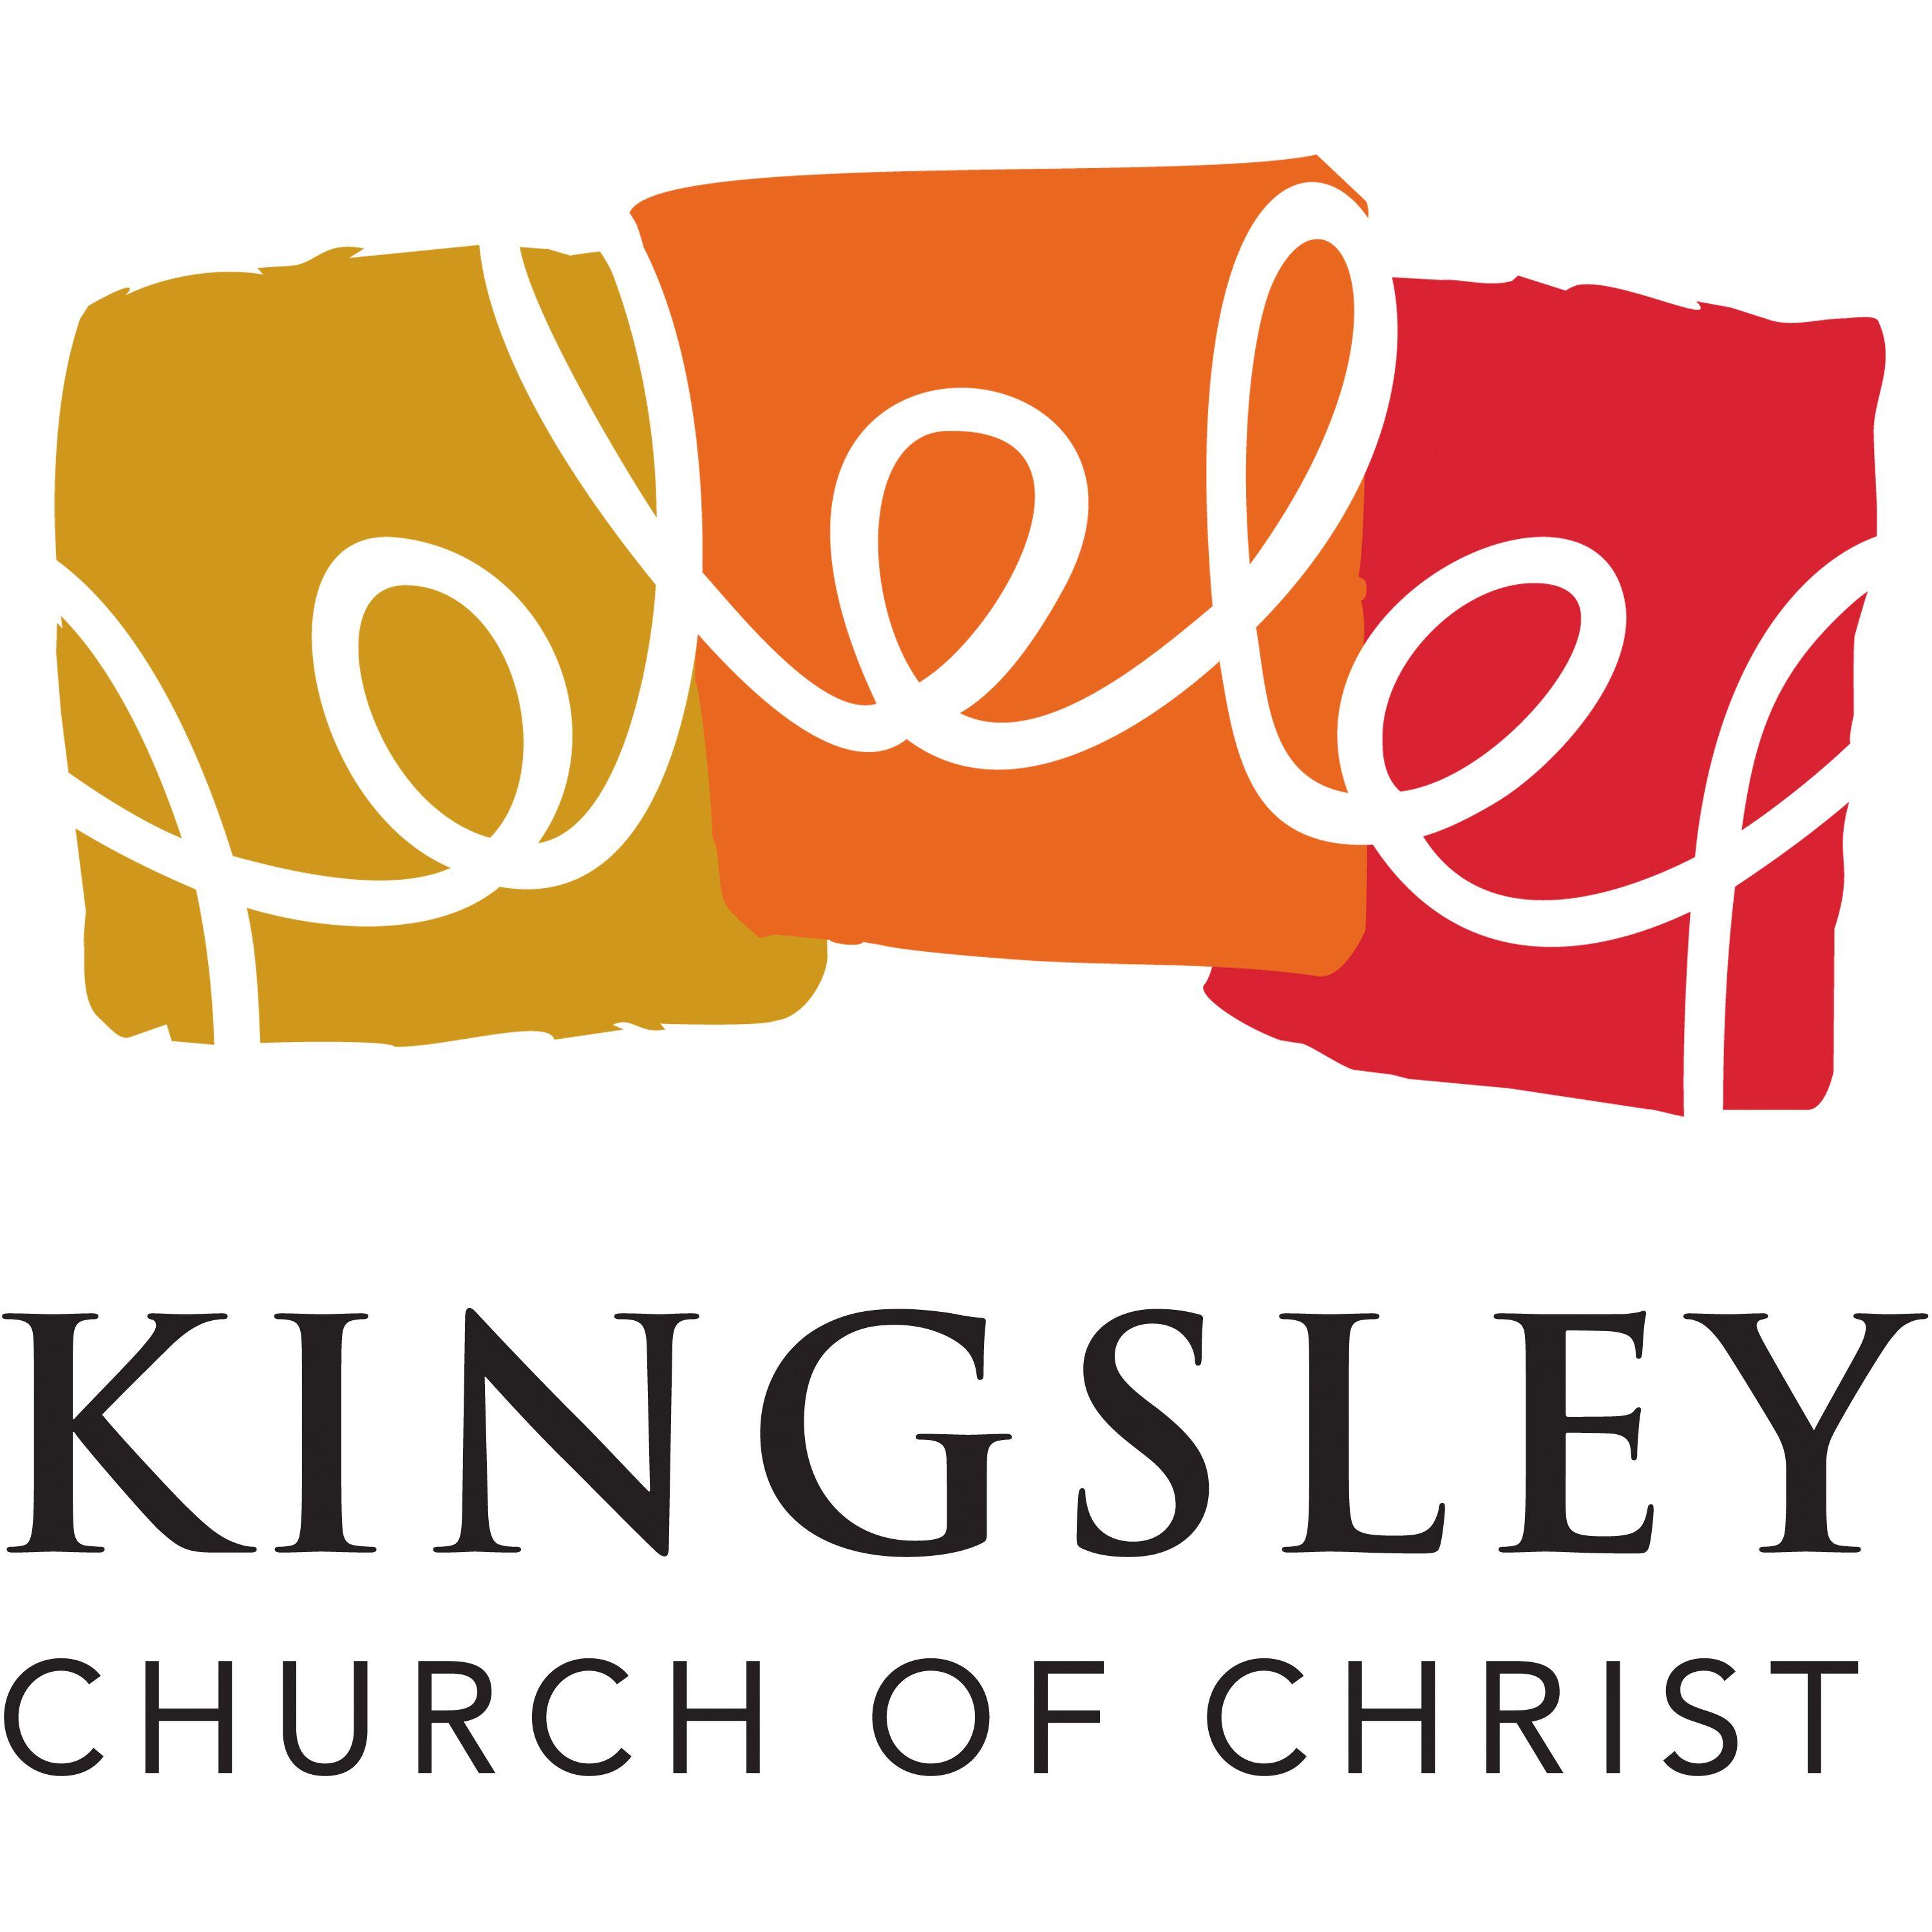 Kingsley Logo - Kingsley Church of Christ – Sharing and Declaring the Love of God in ...